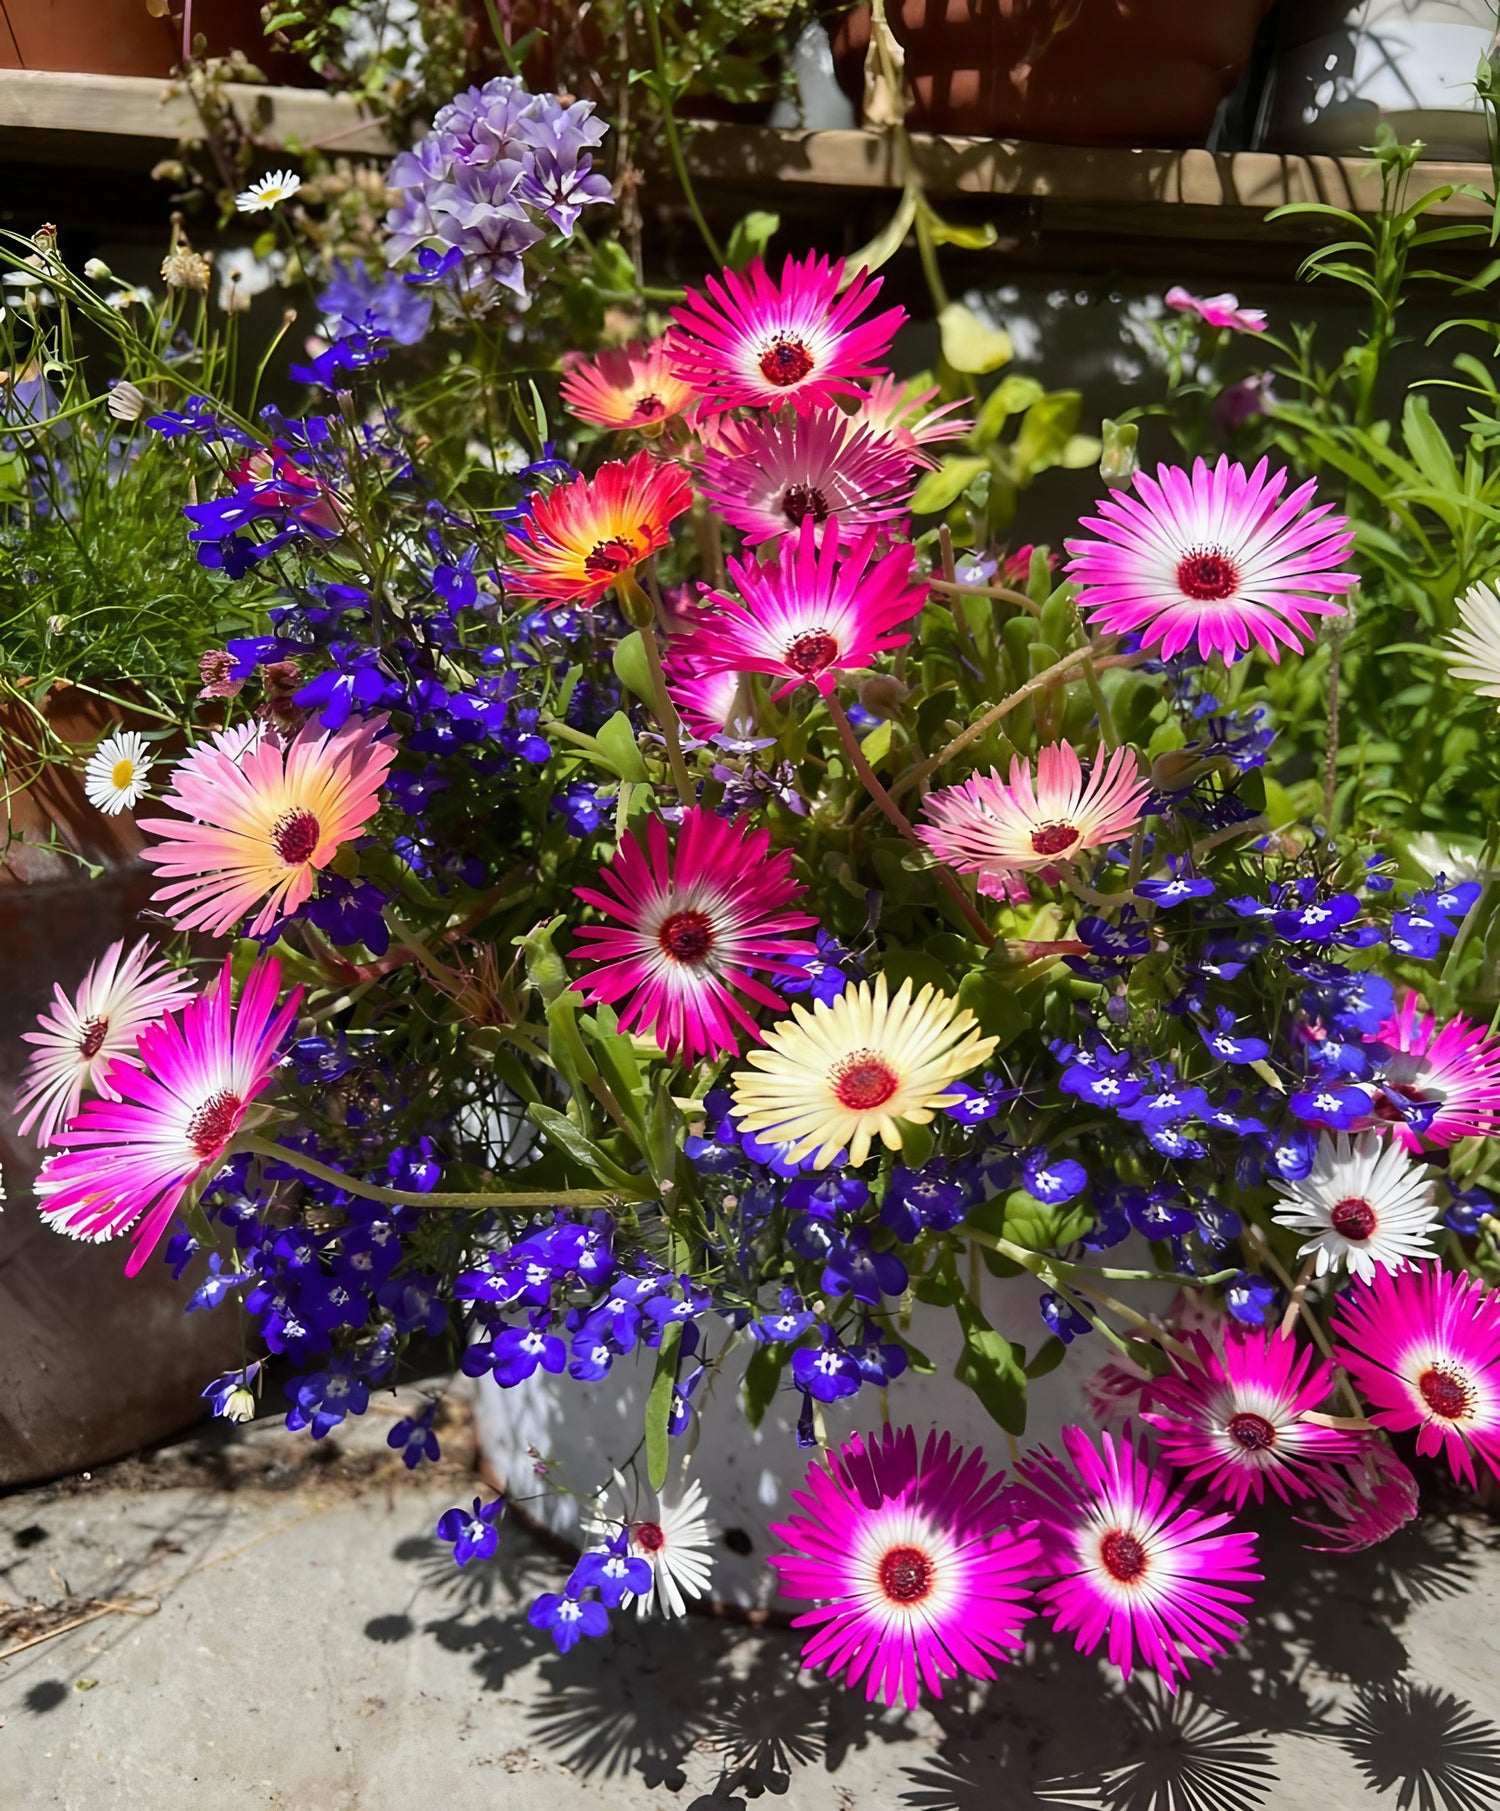 Colorful Mesembryanthemum Harlequin arrangement on a wooden tabletop